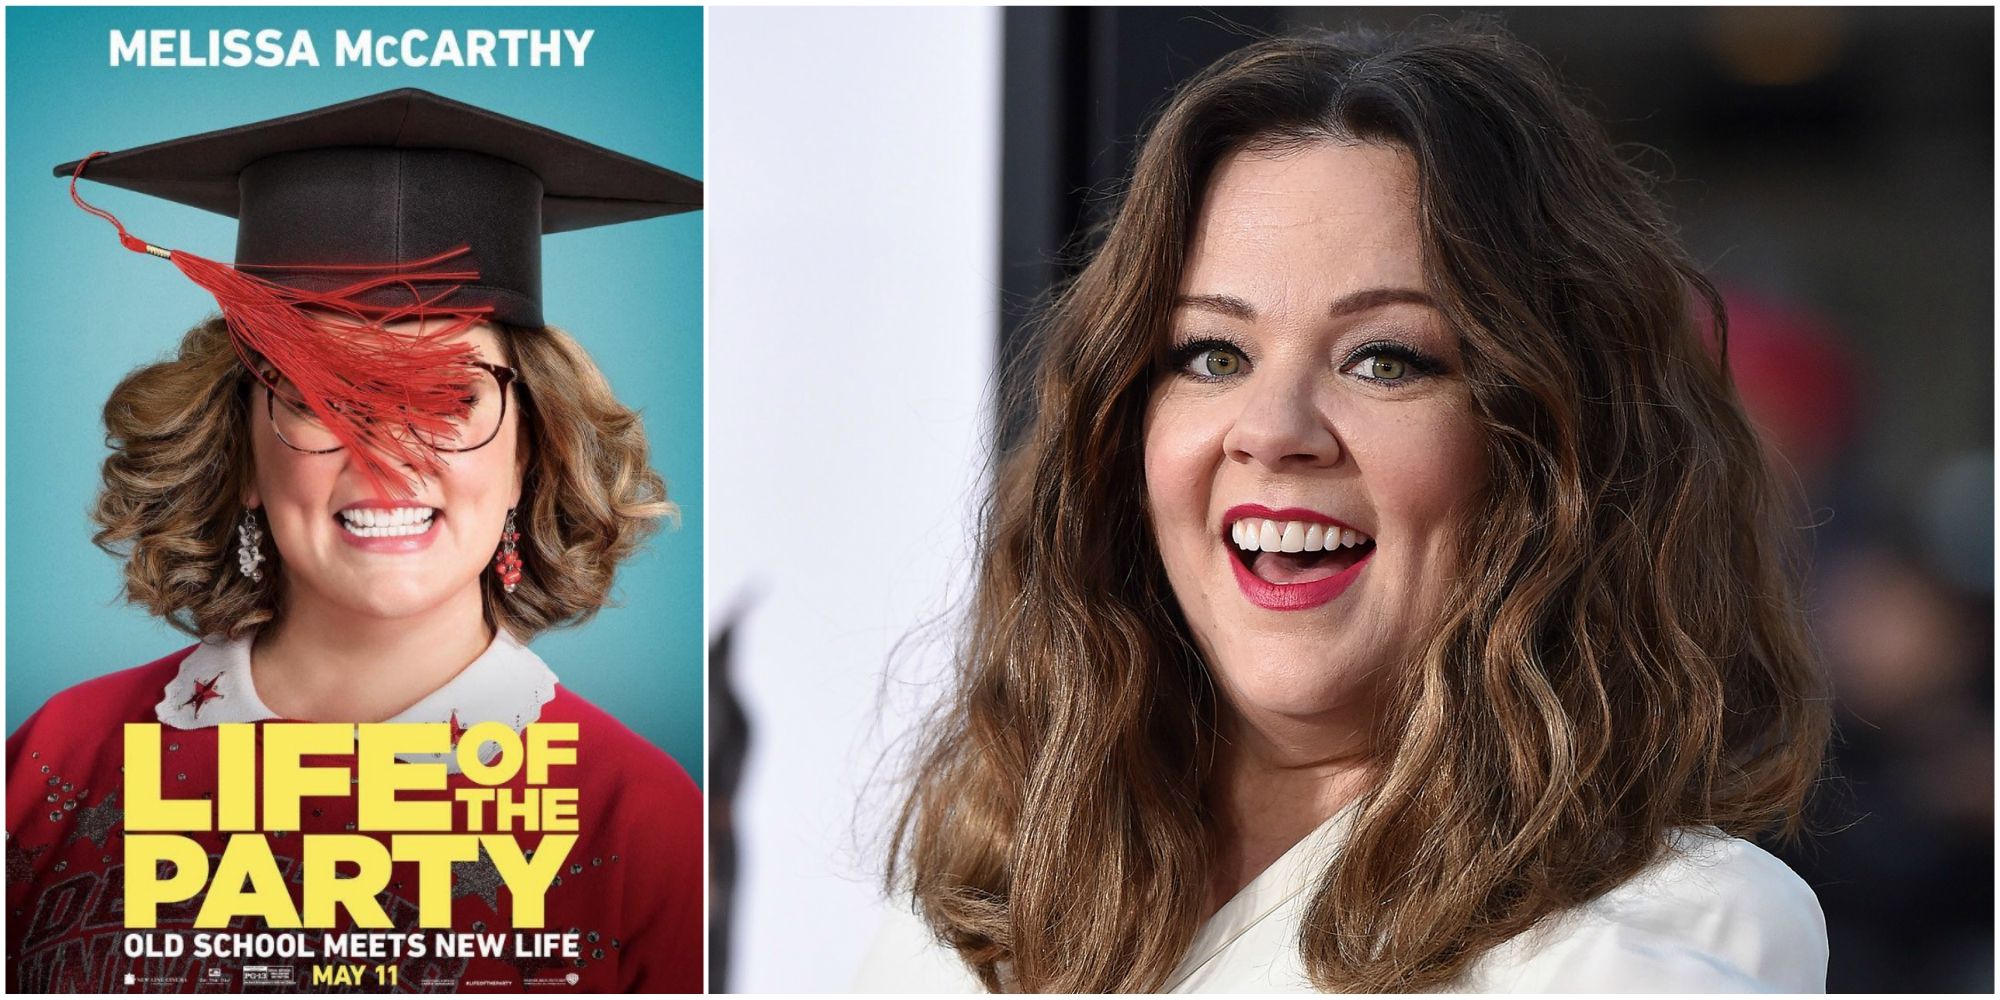 Melissa Mccarthy New Movie Trailer Life Of The Party Movie Trailer